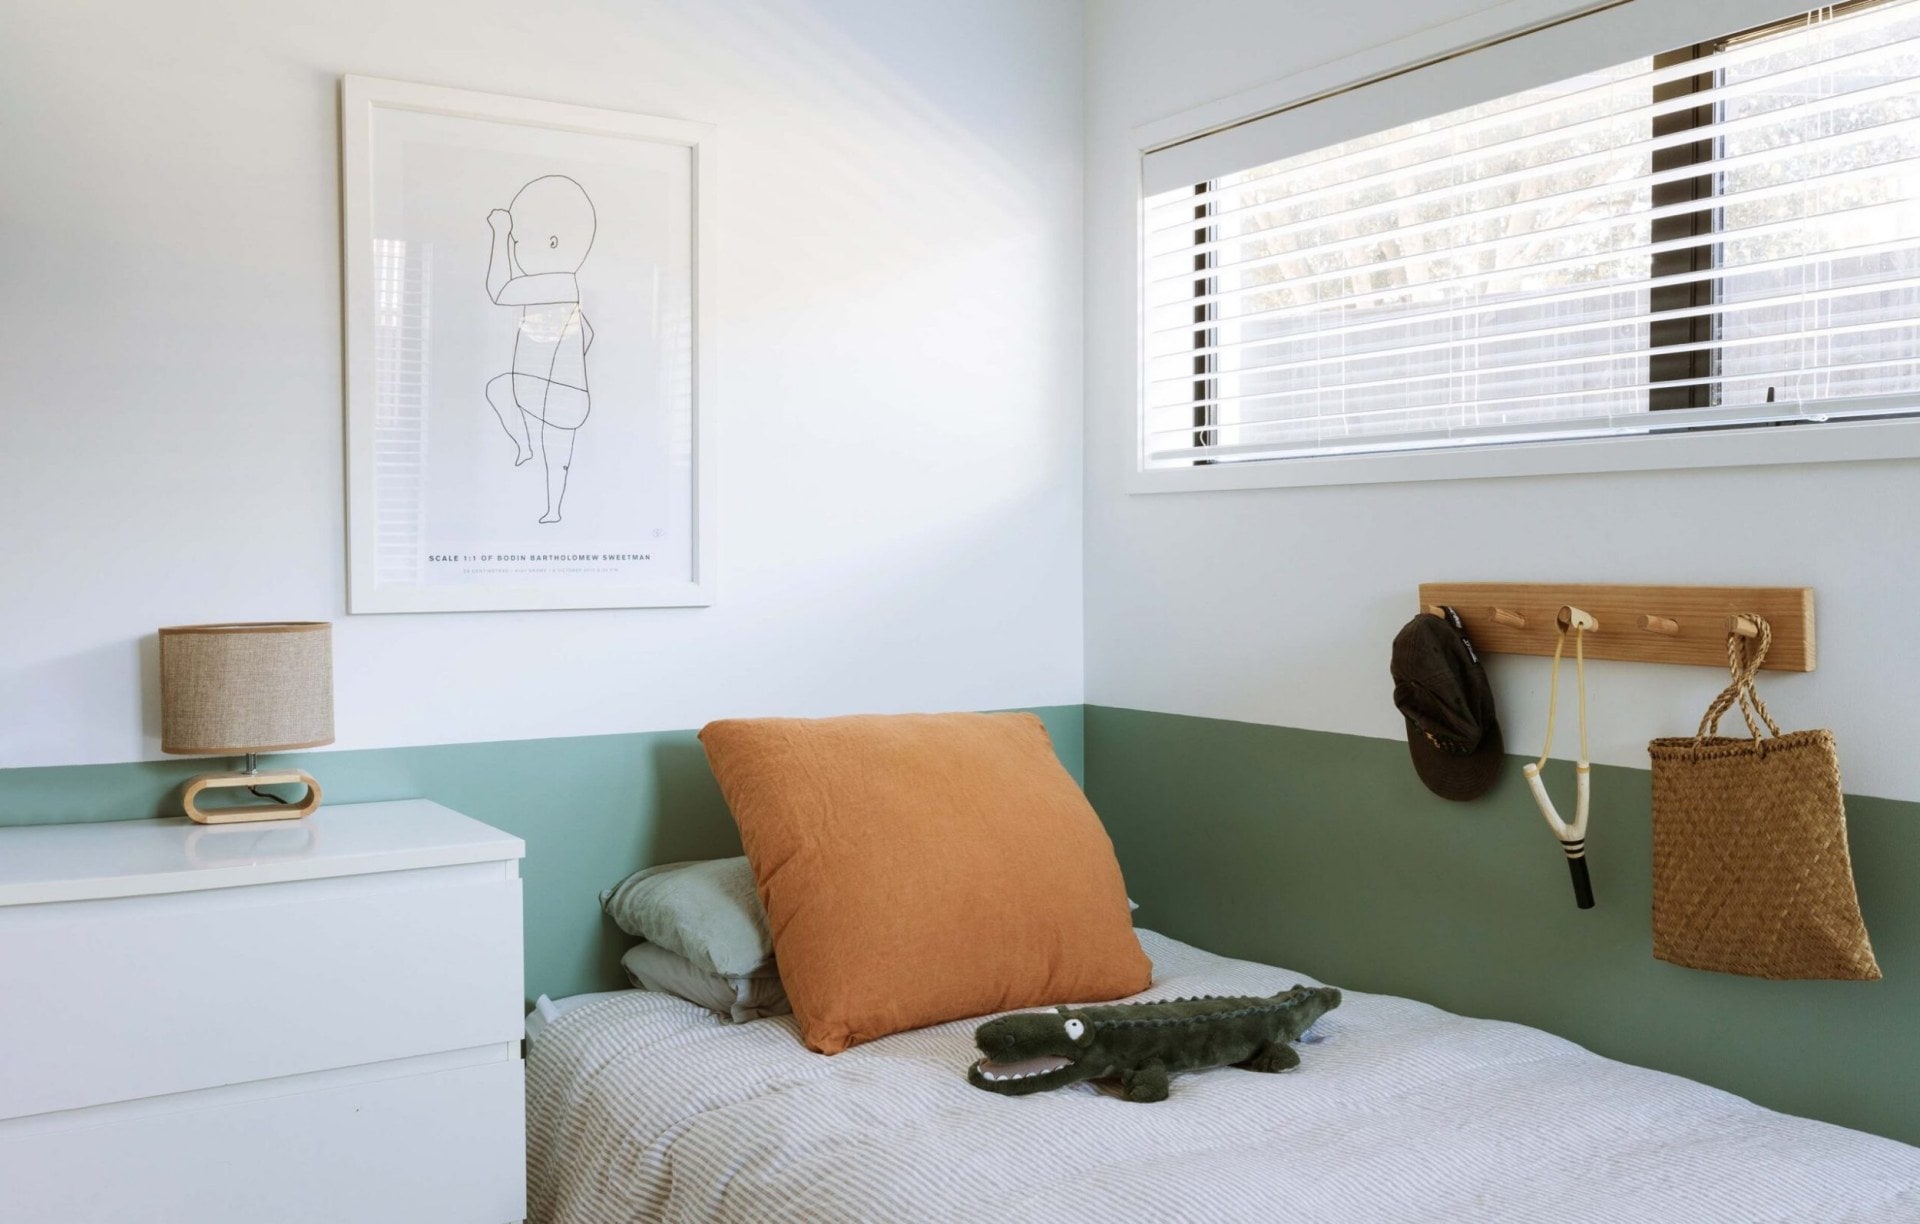 Child's bedroom with half painted wall in green, hooks on the wall and white and rust bed linen